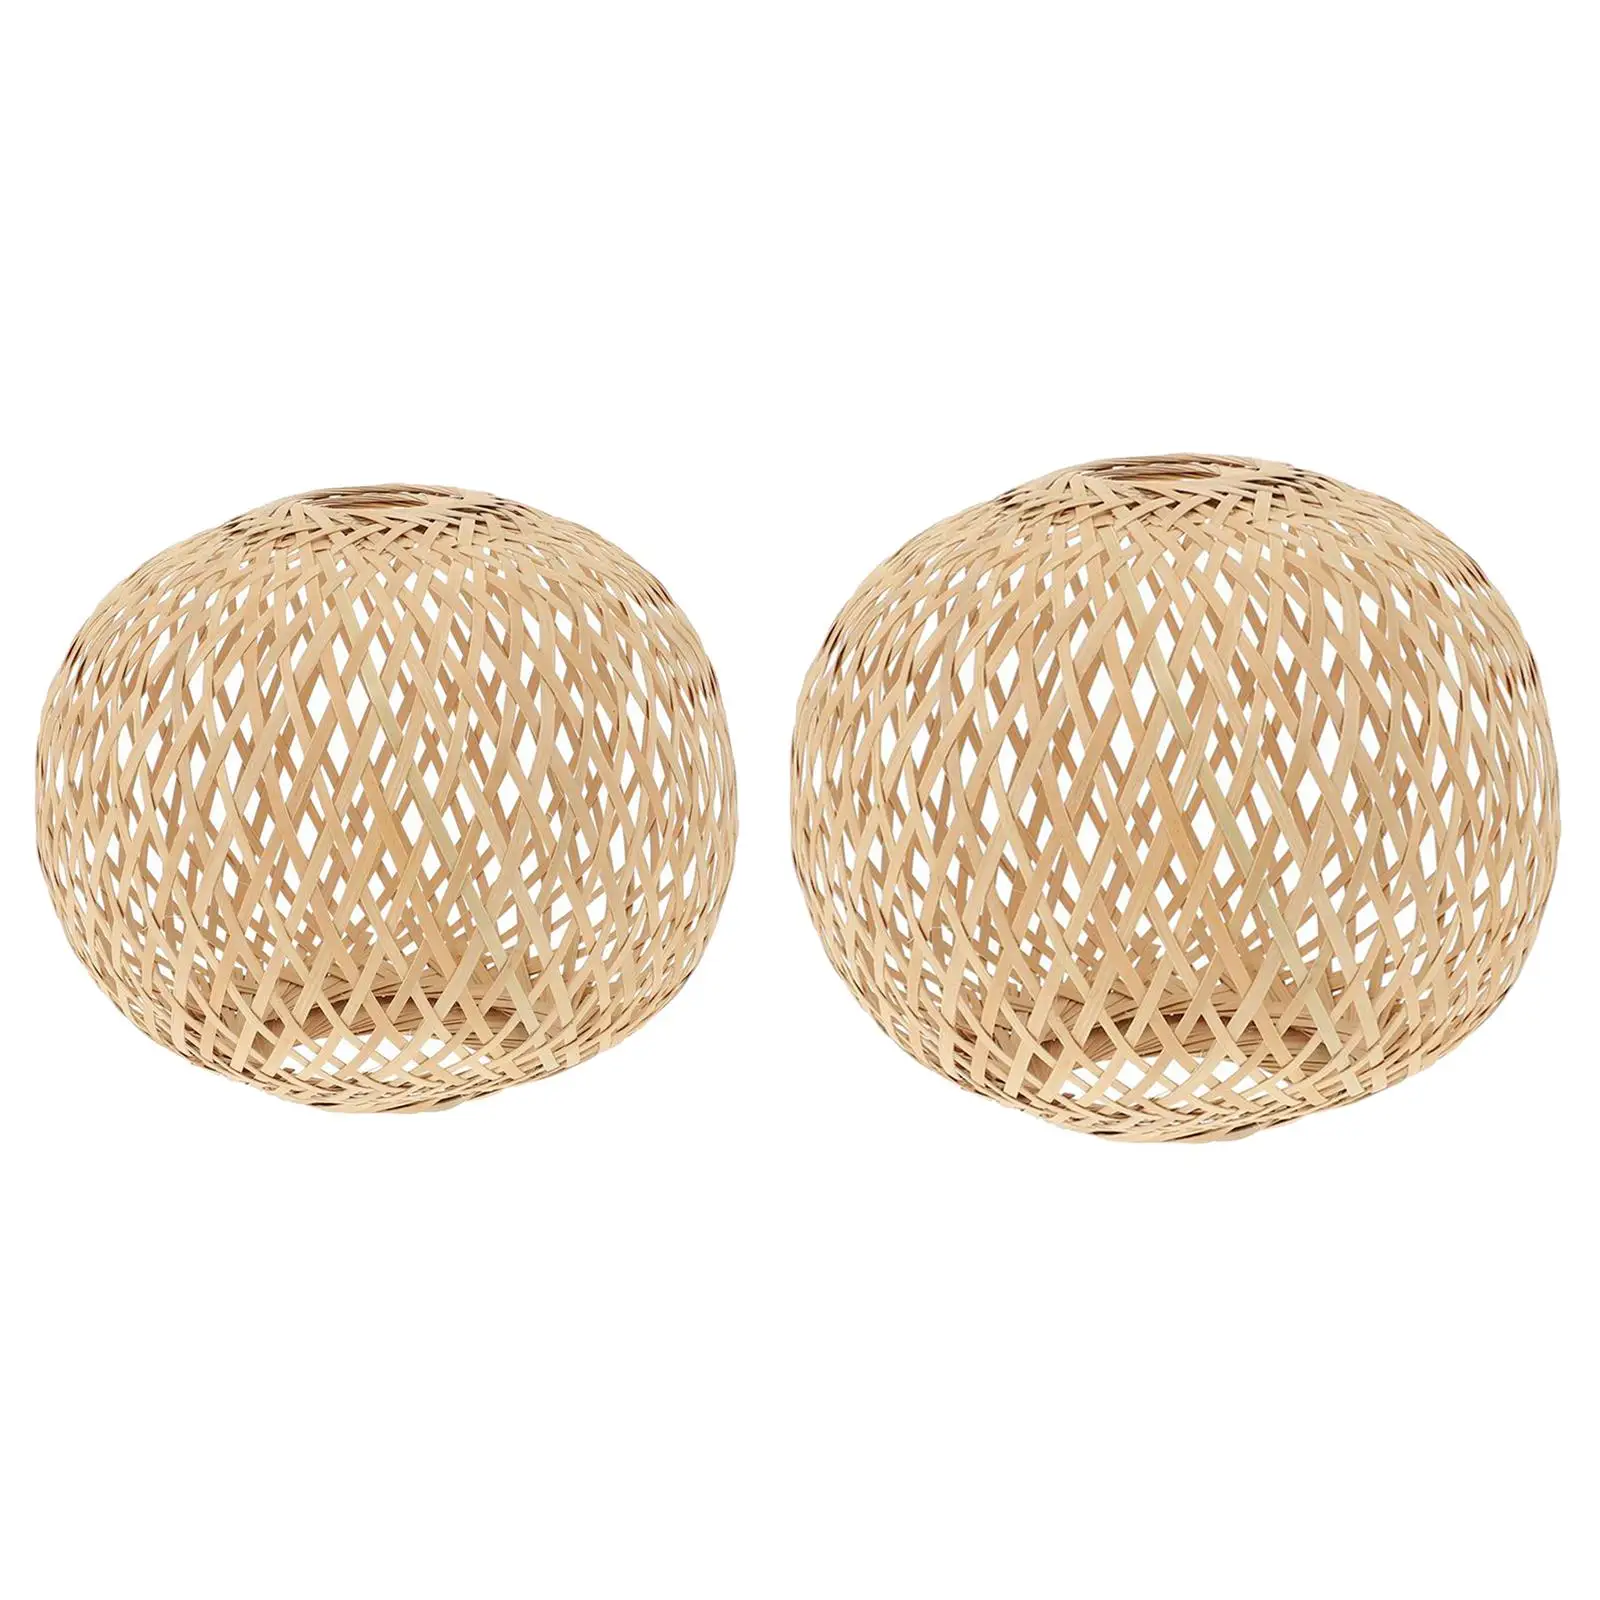 Bamboo Woven Lampshade Pendant Light Shade Handwoven Hanging Light Fixture Chandelier Cover for Living Room Kitchen Island Cafe